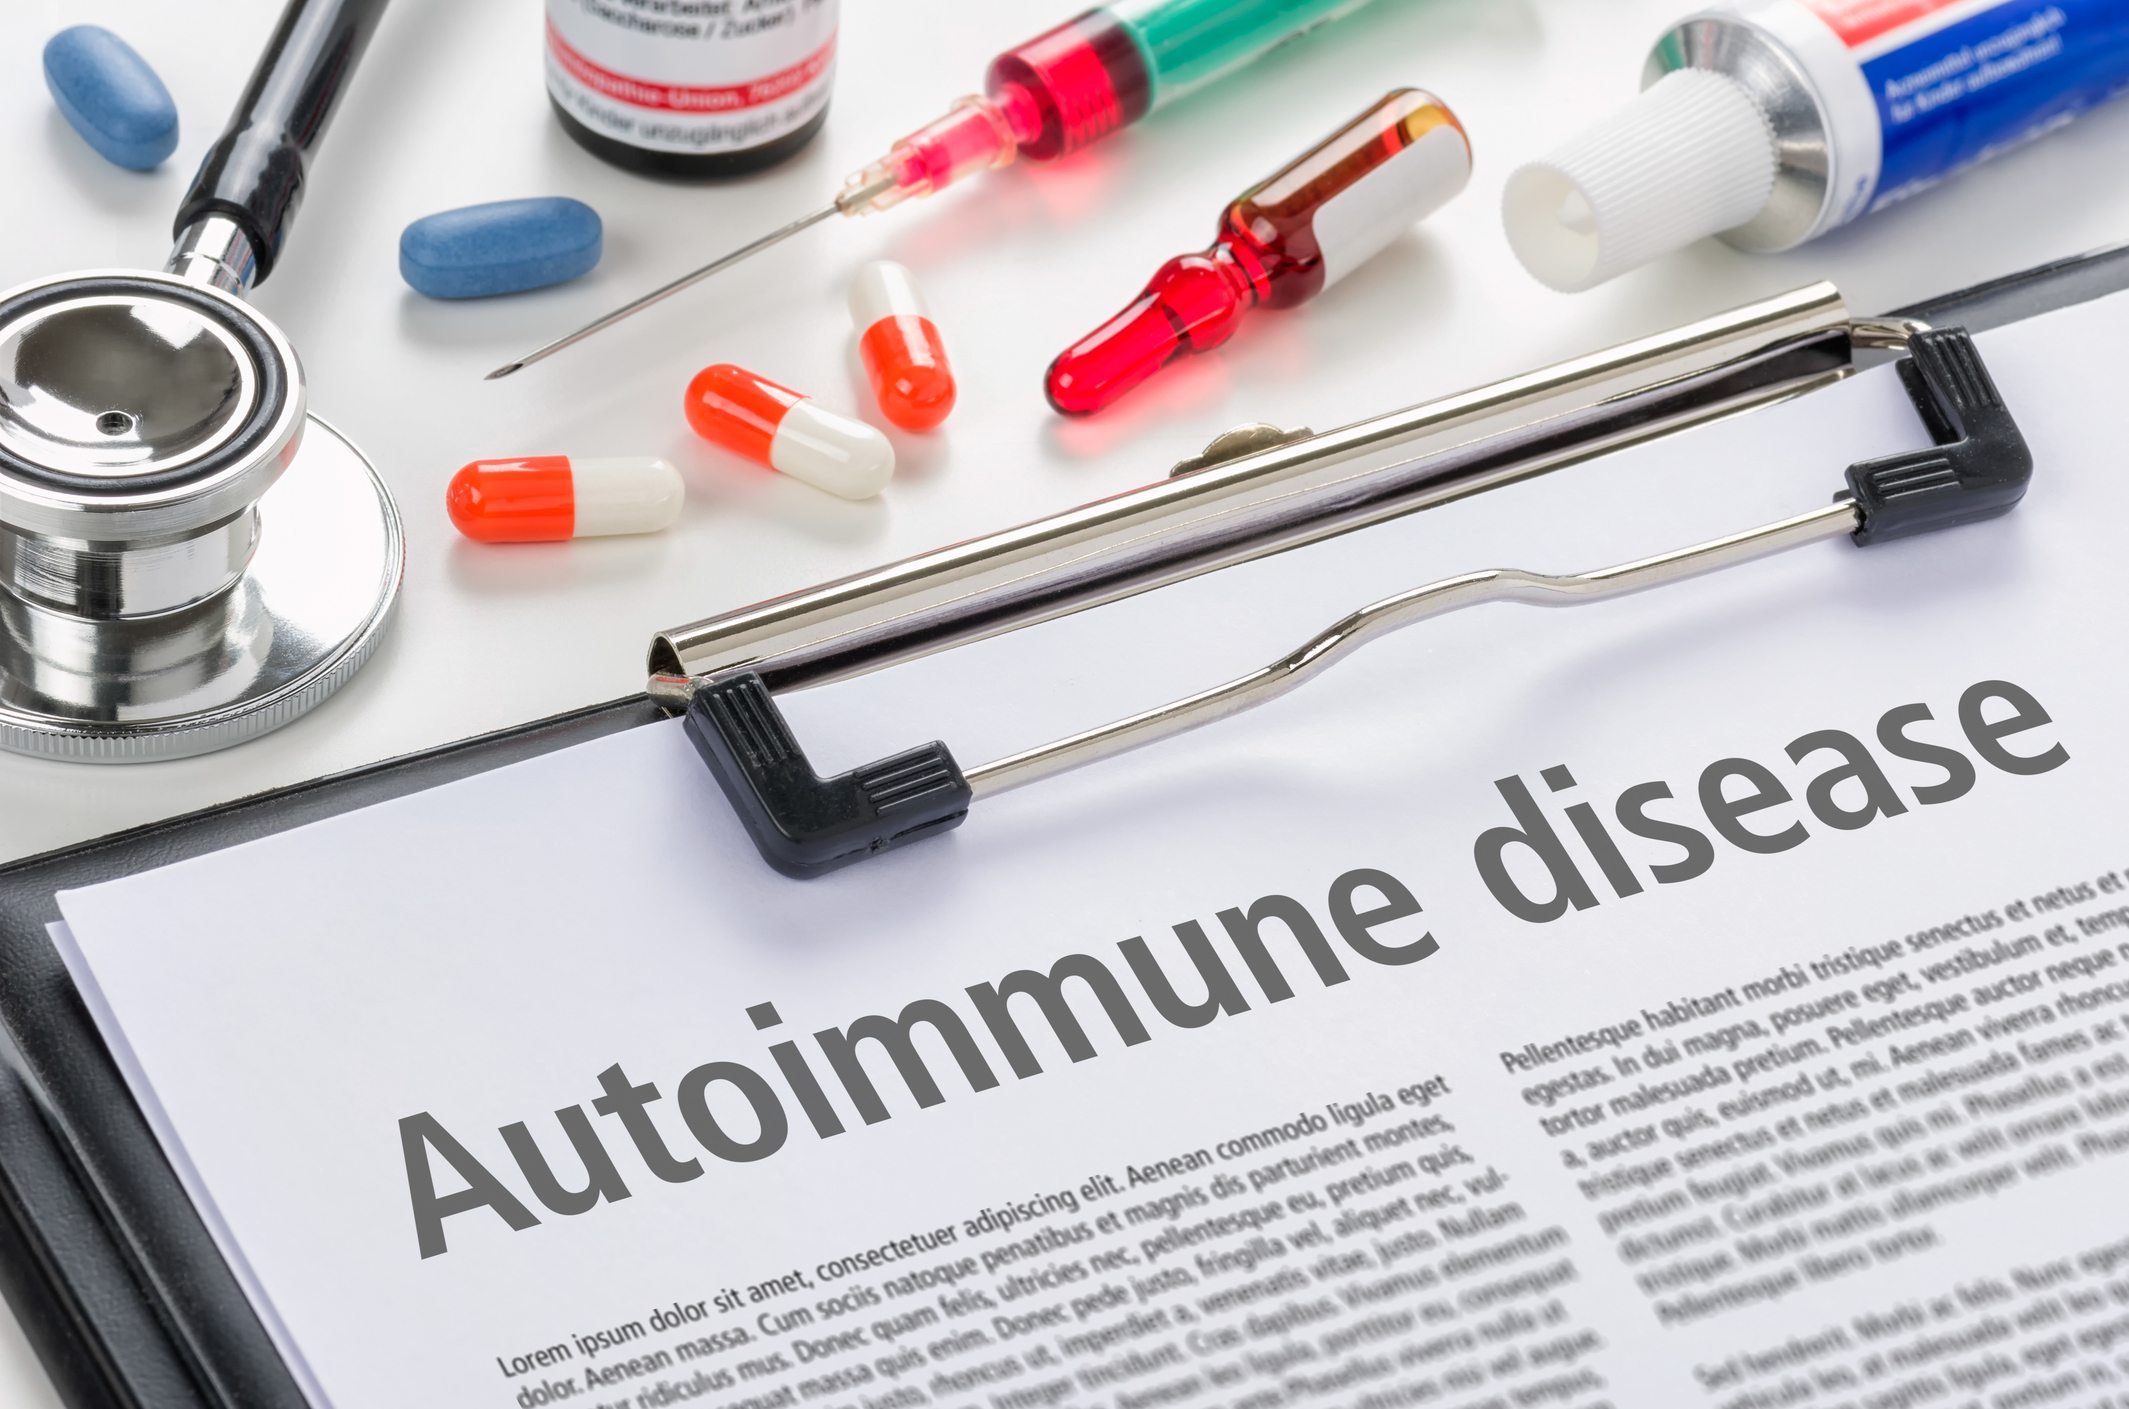 Autoimmune Disease Diagnosis Market 2021 Size Share Trends Industry Growth and Forecast 2026